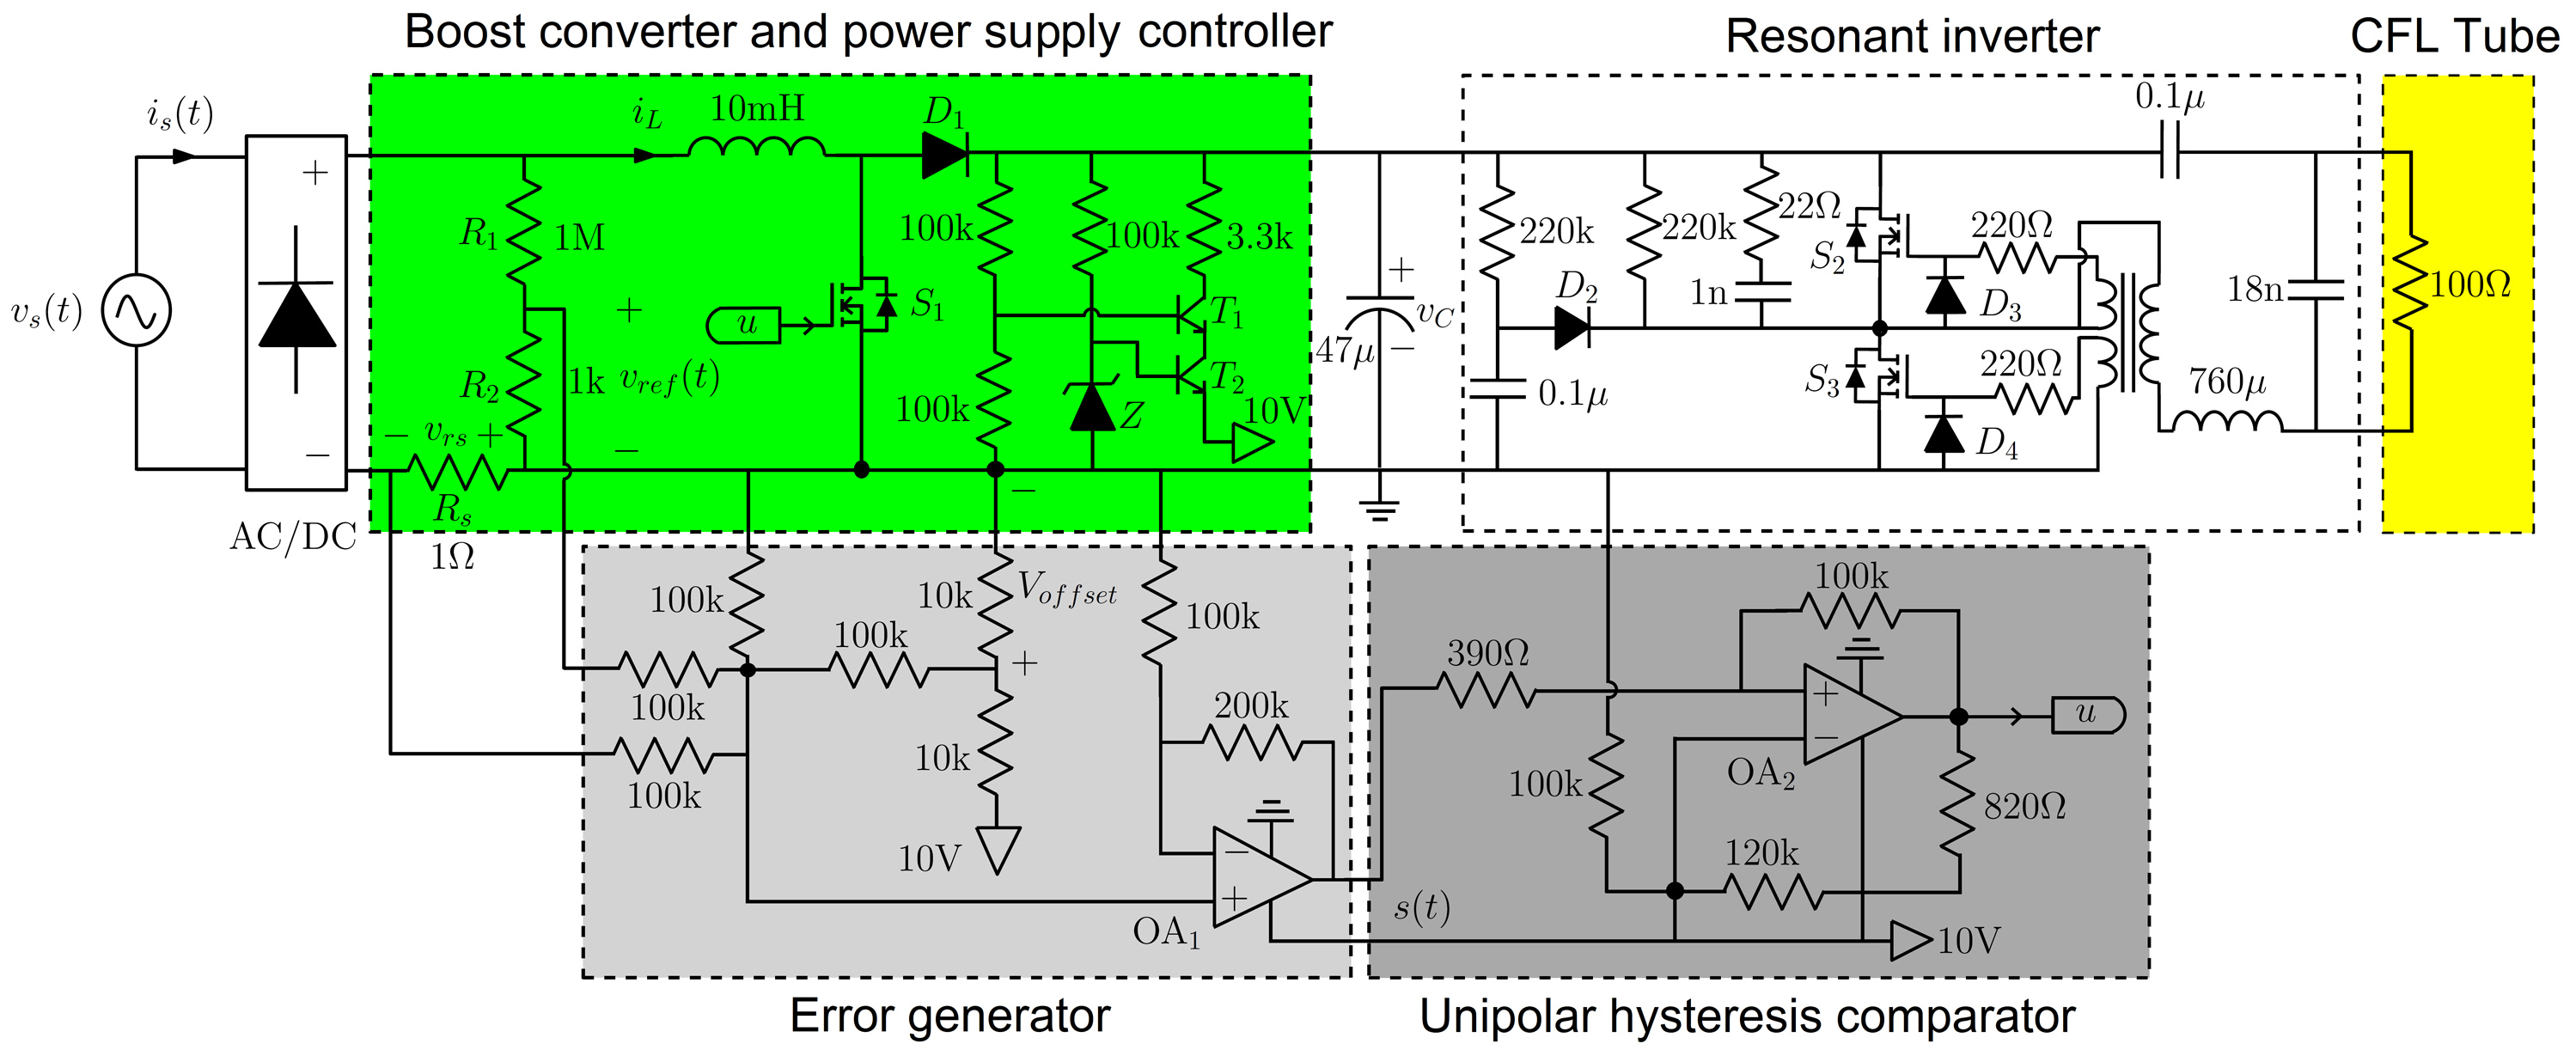 Schematic circuit diagram of the implemented boost PFC converter for CFL.